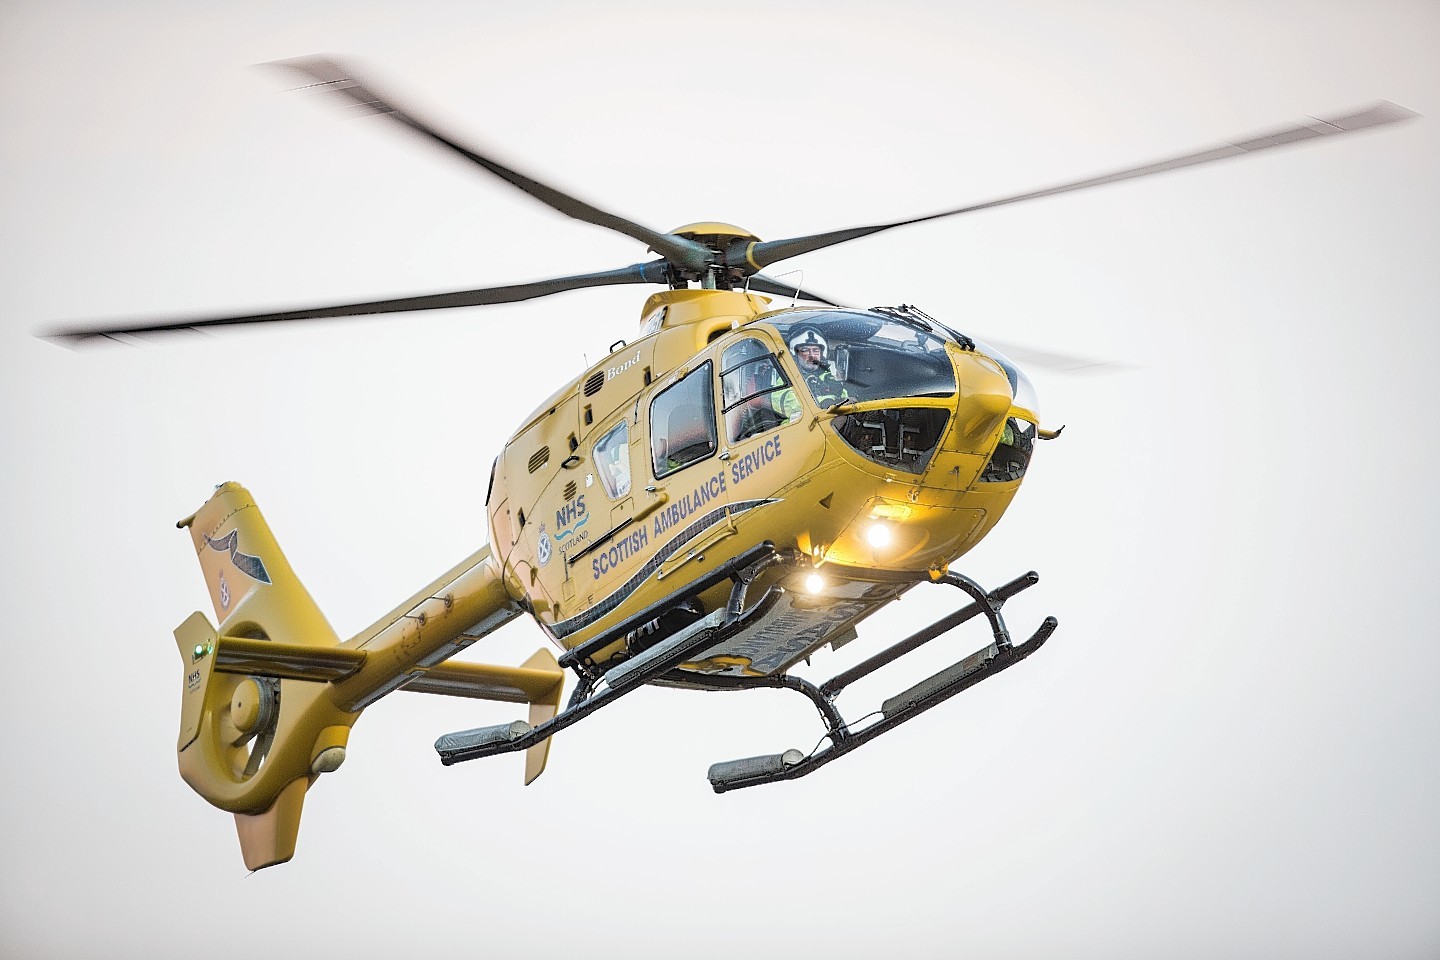 An air ambulance was called in to evacuate casualty to hospital